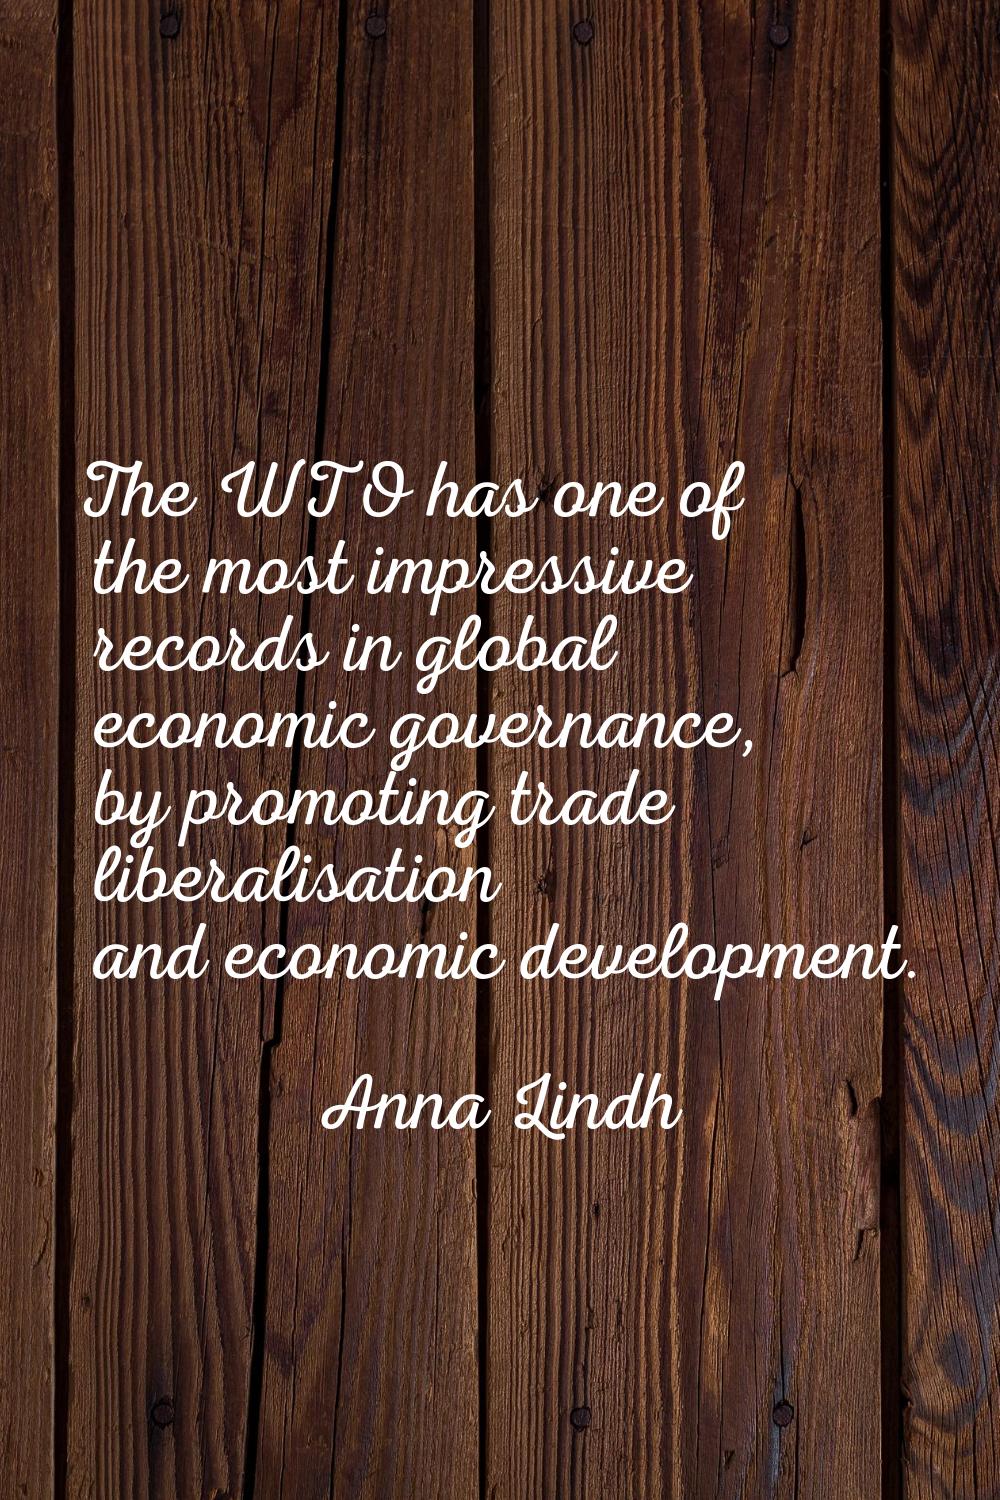 The WTO has one of the most impressive records in global economic governance, by promoting trade li